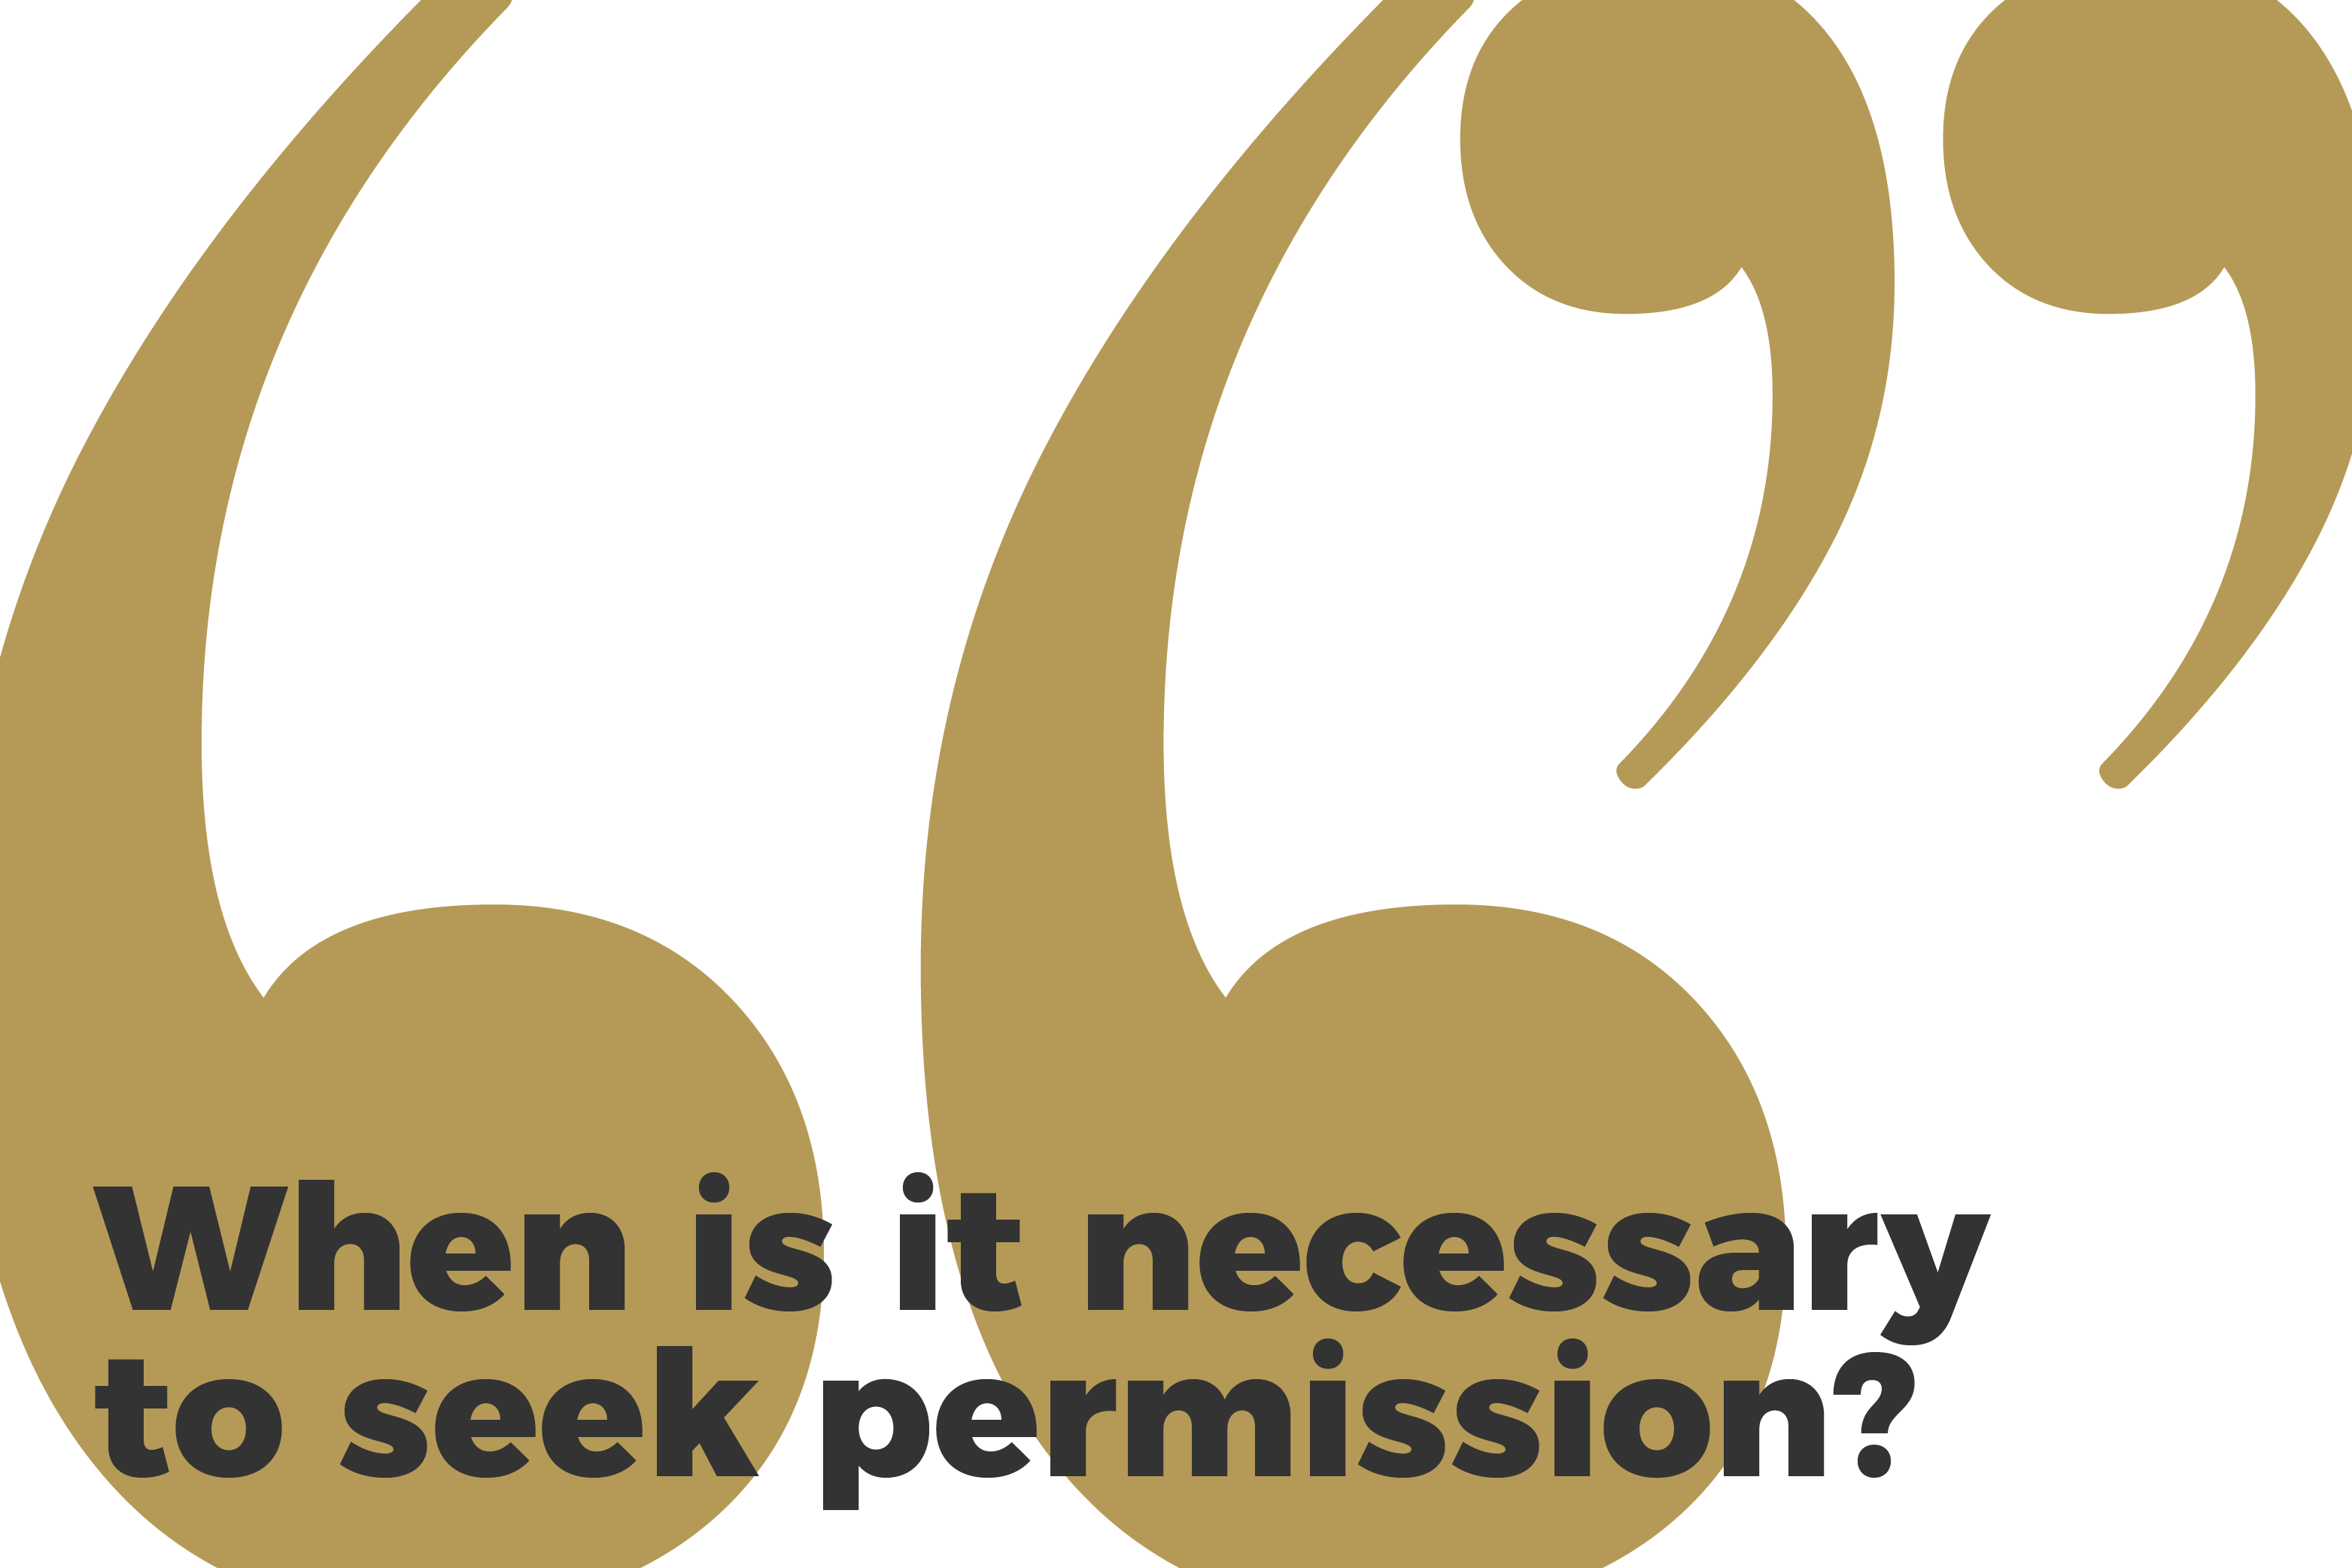 When is it necessary to seek permission?